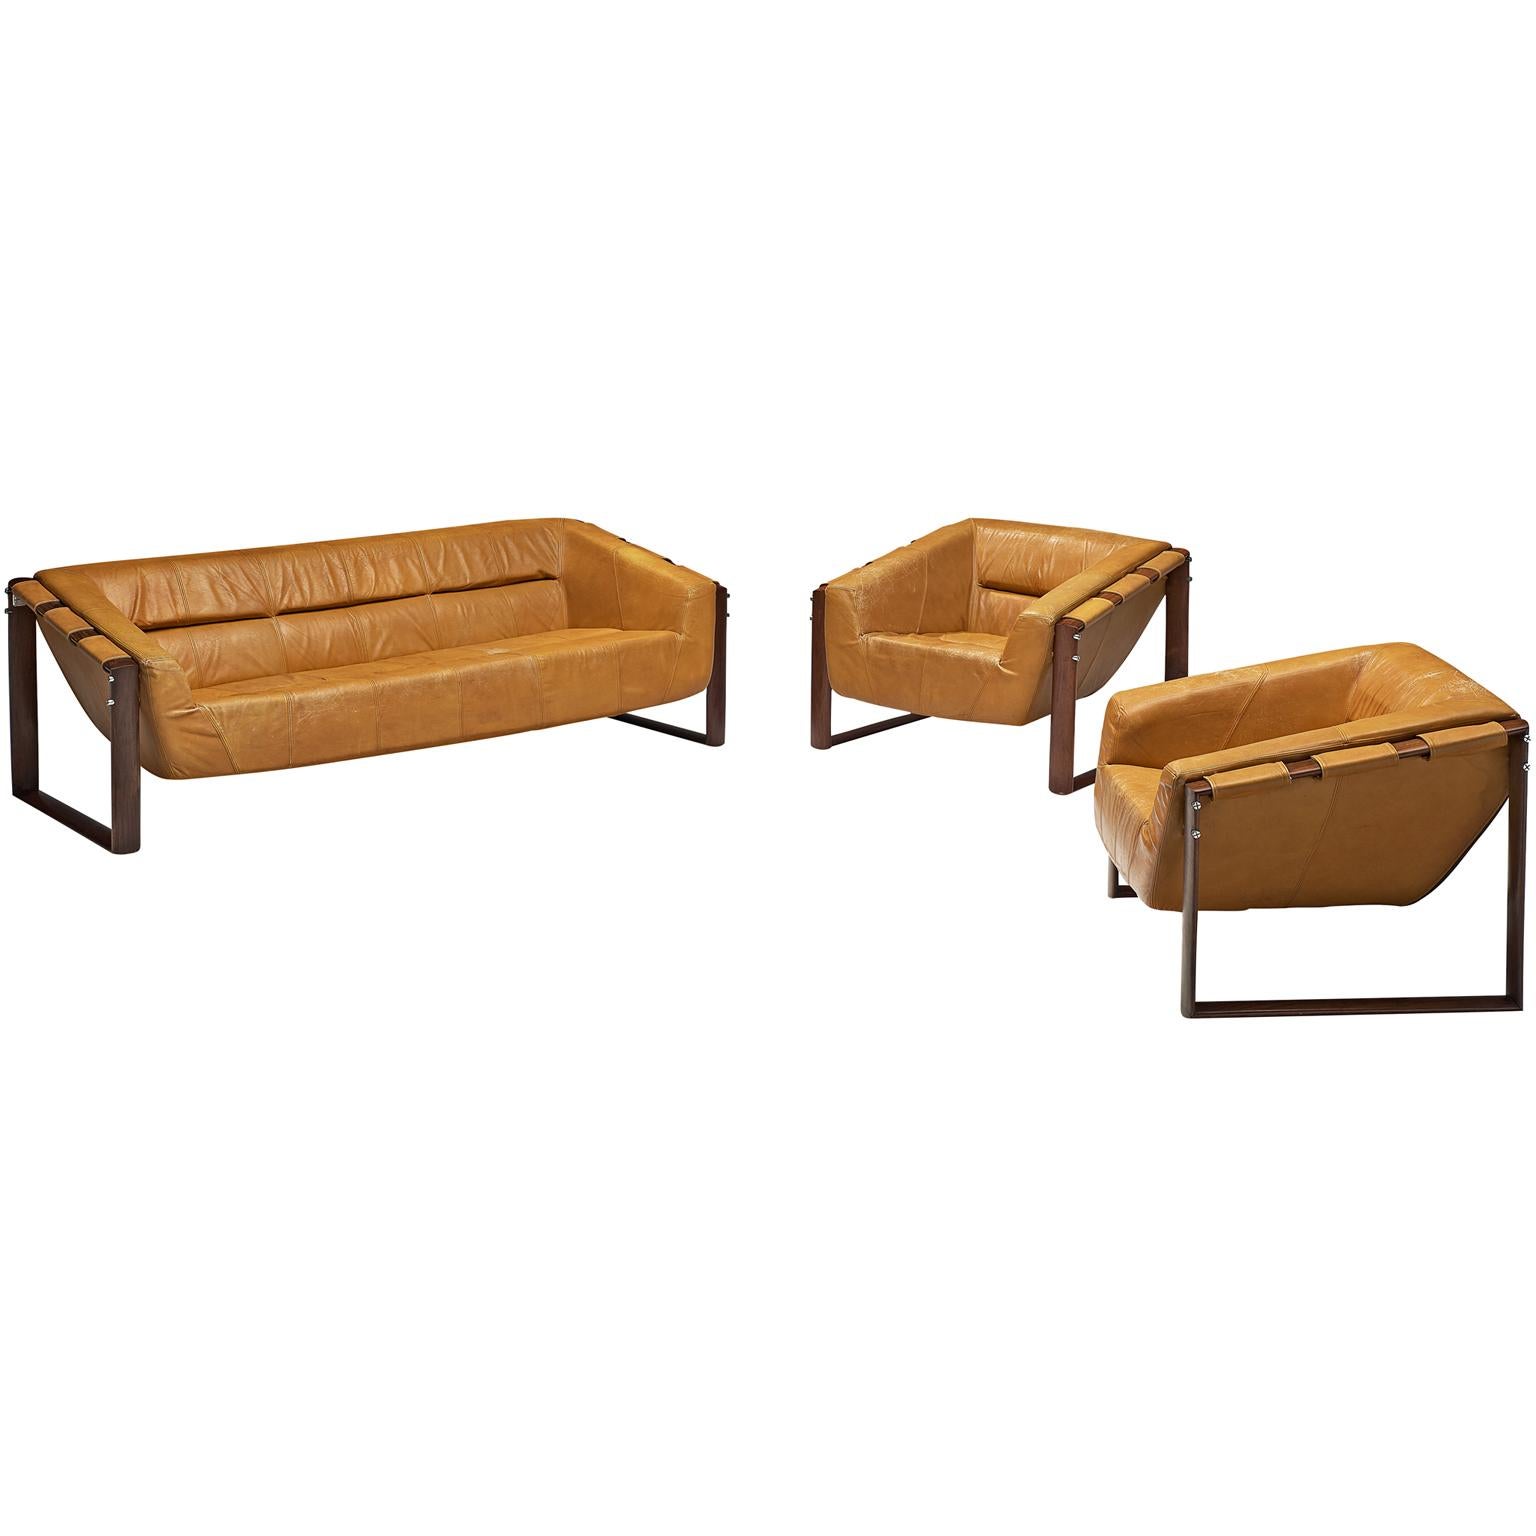 Percival Lafer Living Room Set in Ochre Yellow Leather